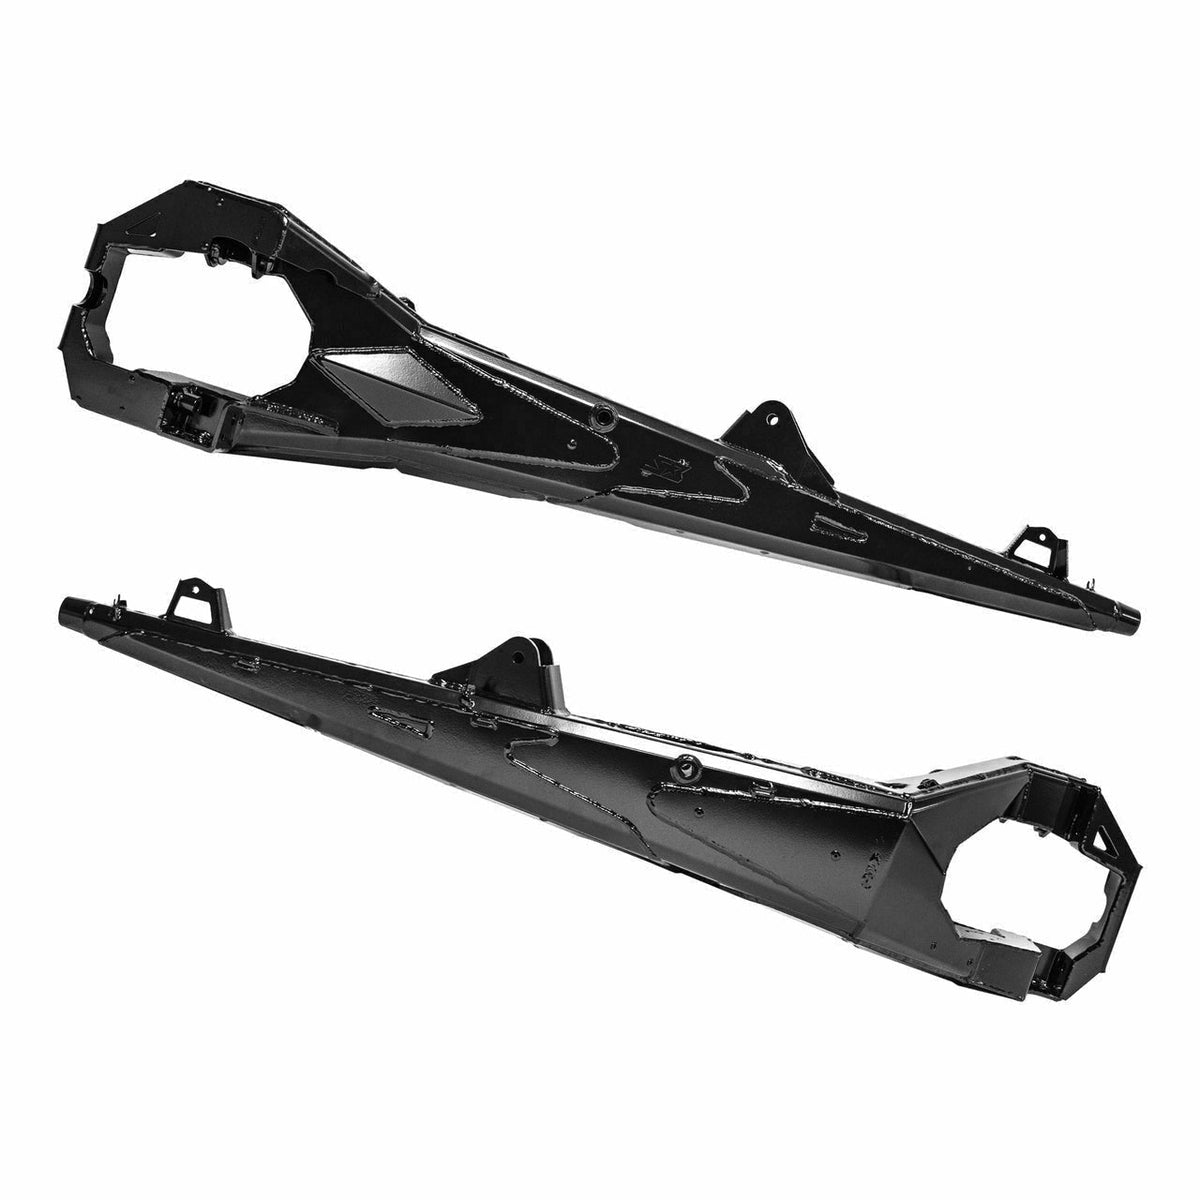 S3 Power Sports Can Am Maverick X3 72" Trailing Arms